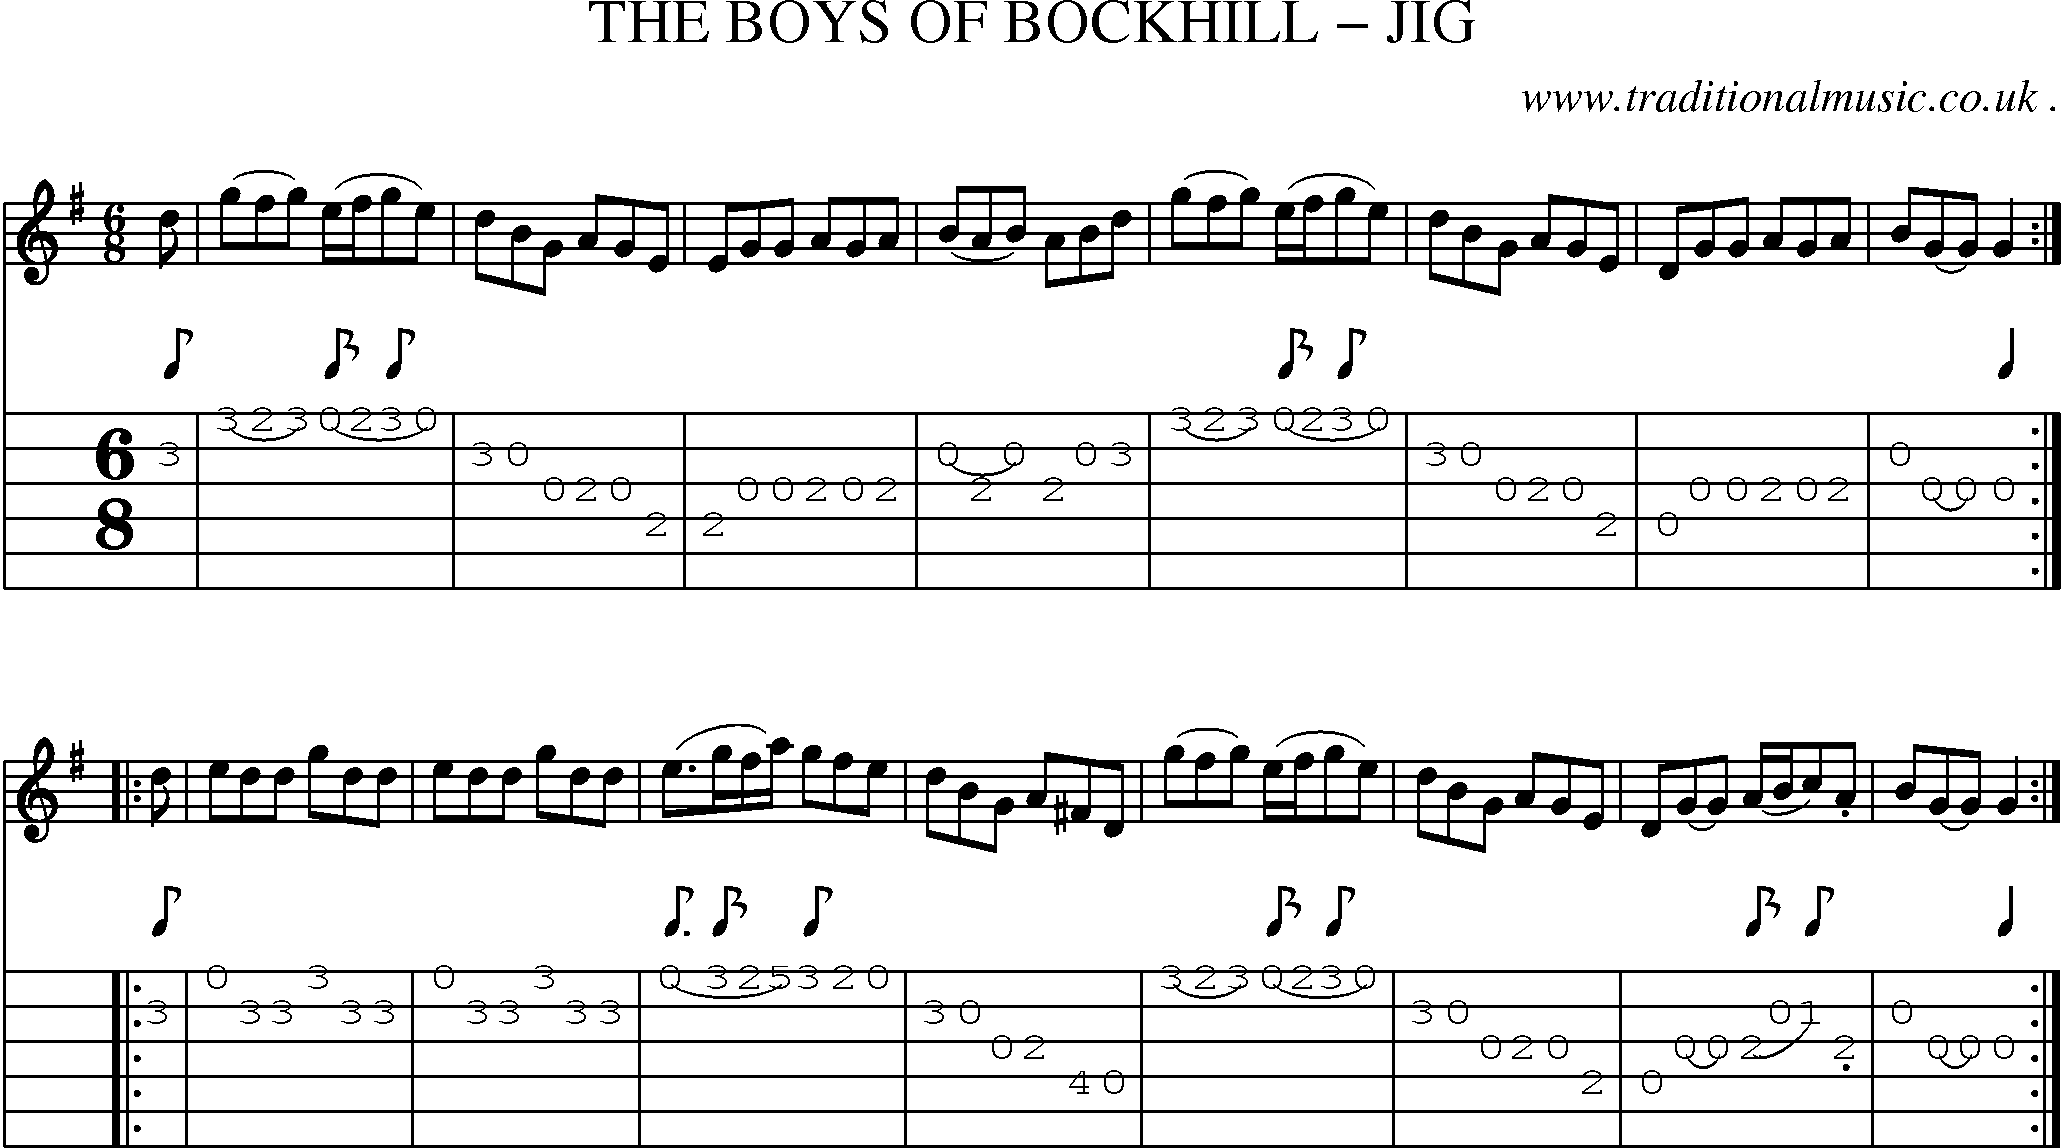 Sheet-Music and Guitar Tabs for The Boys Of Bockhill Jig